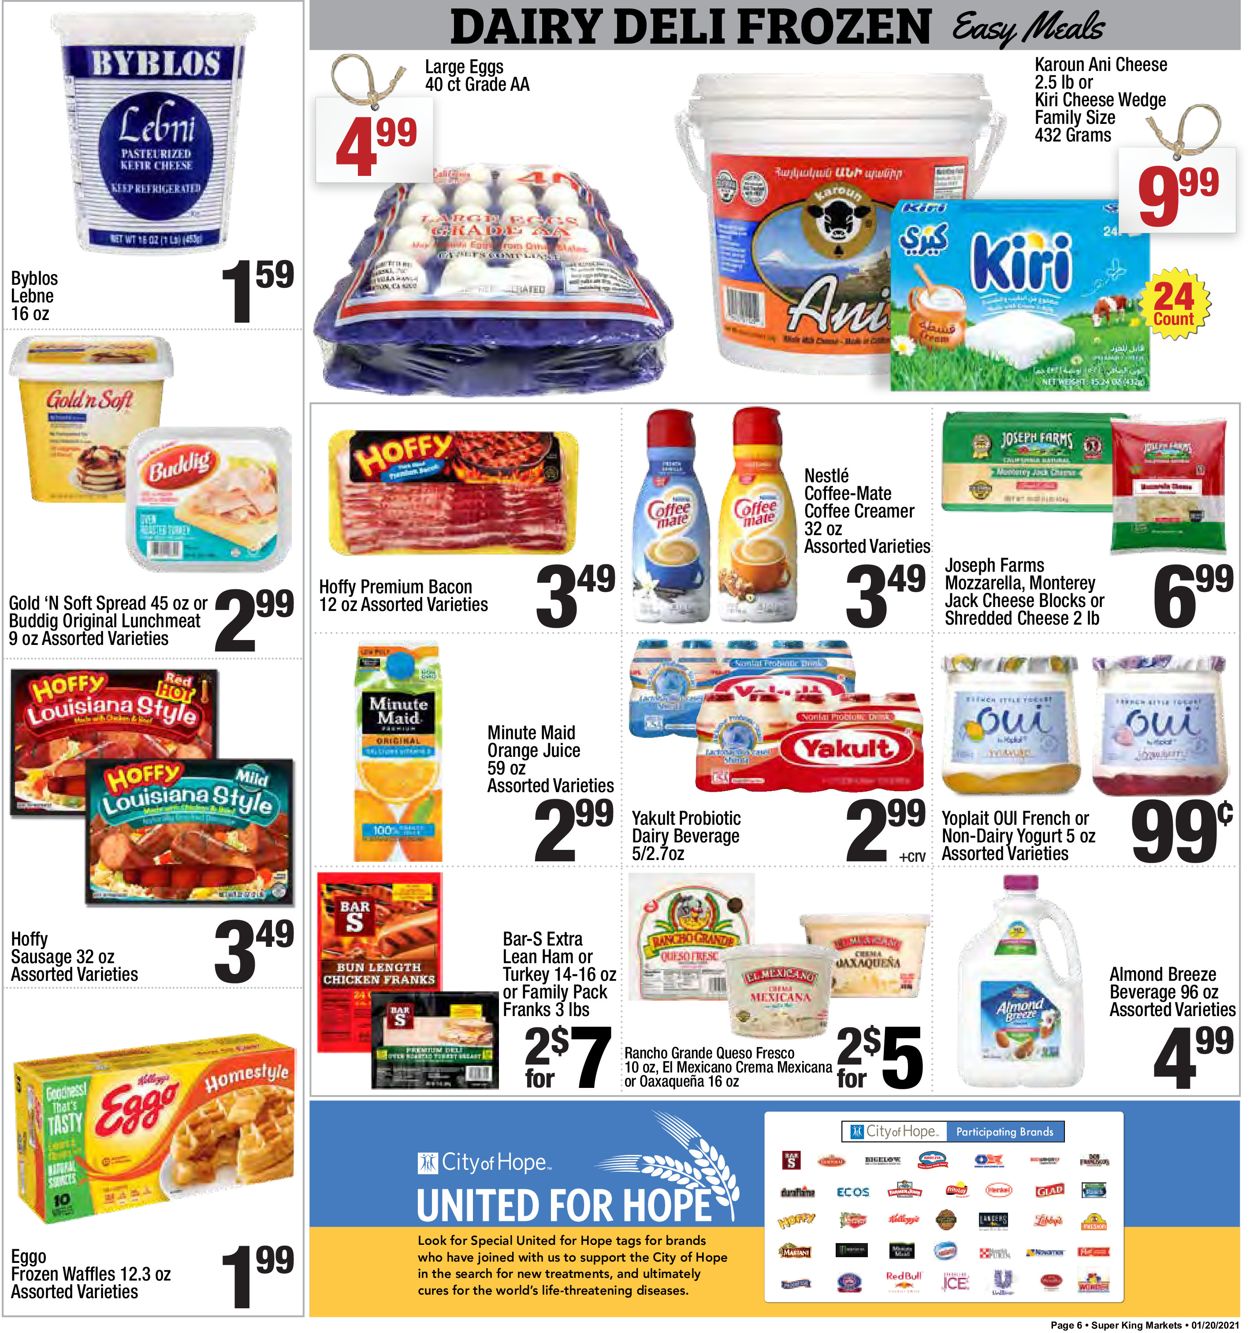 Super King Market Ad from 01/20/2021